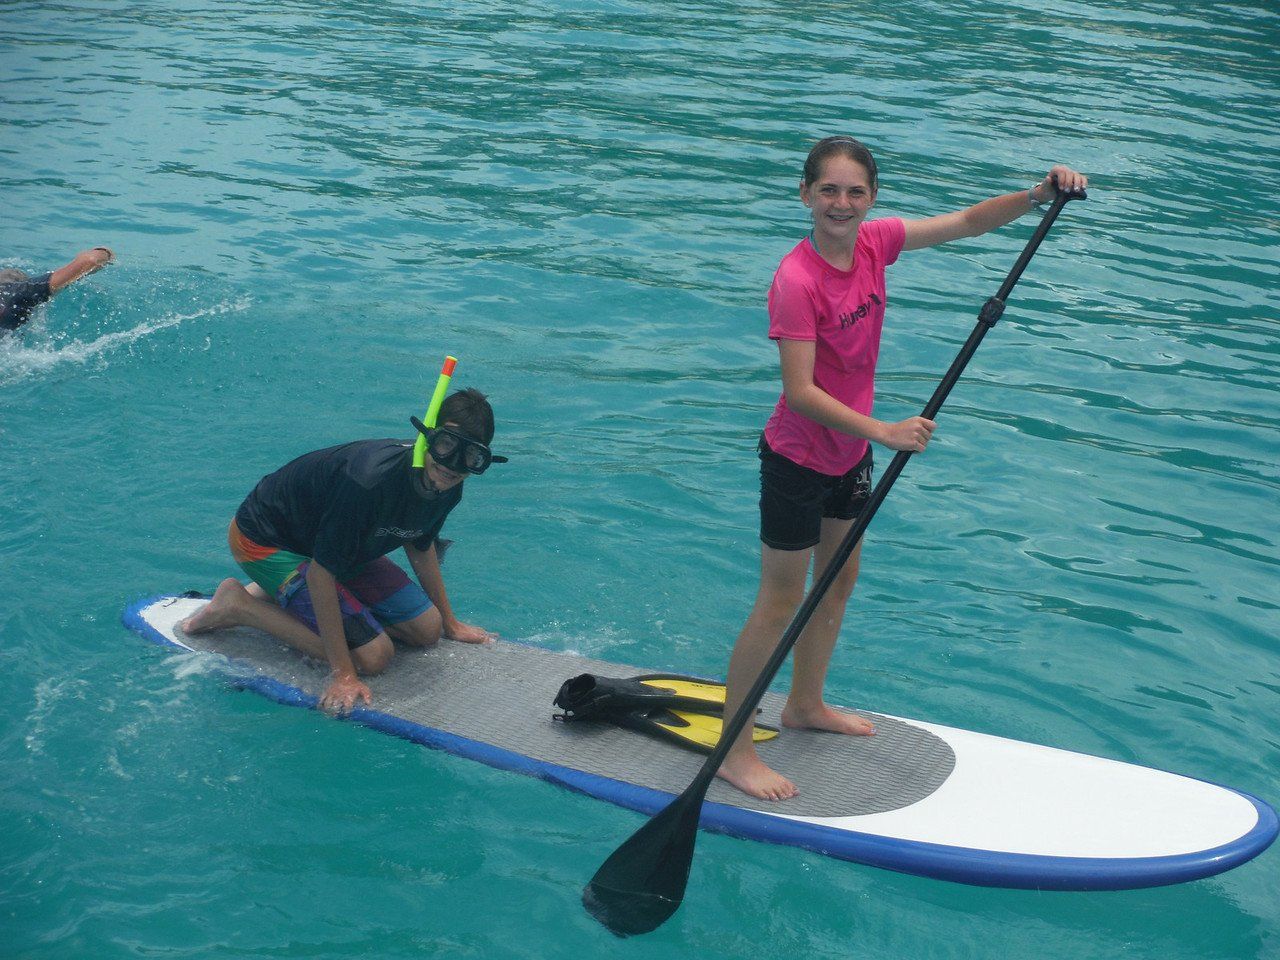 two people on a paddleboard, one sitting, wearing snorkel gear, another standing with the paddle